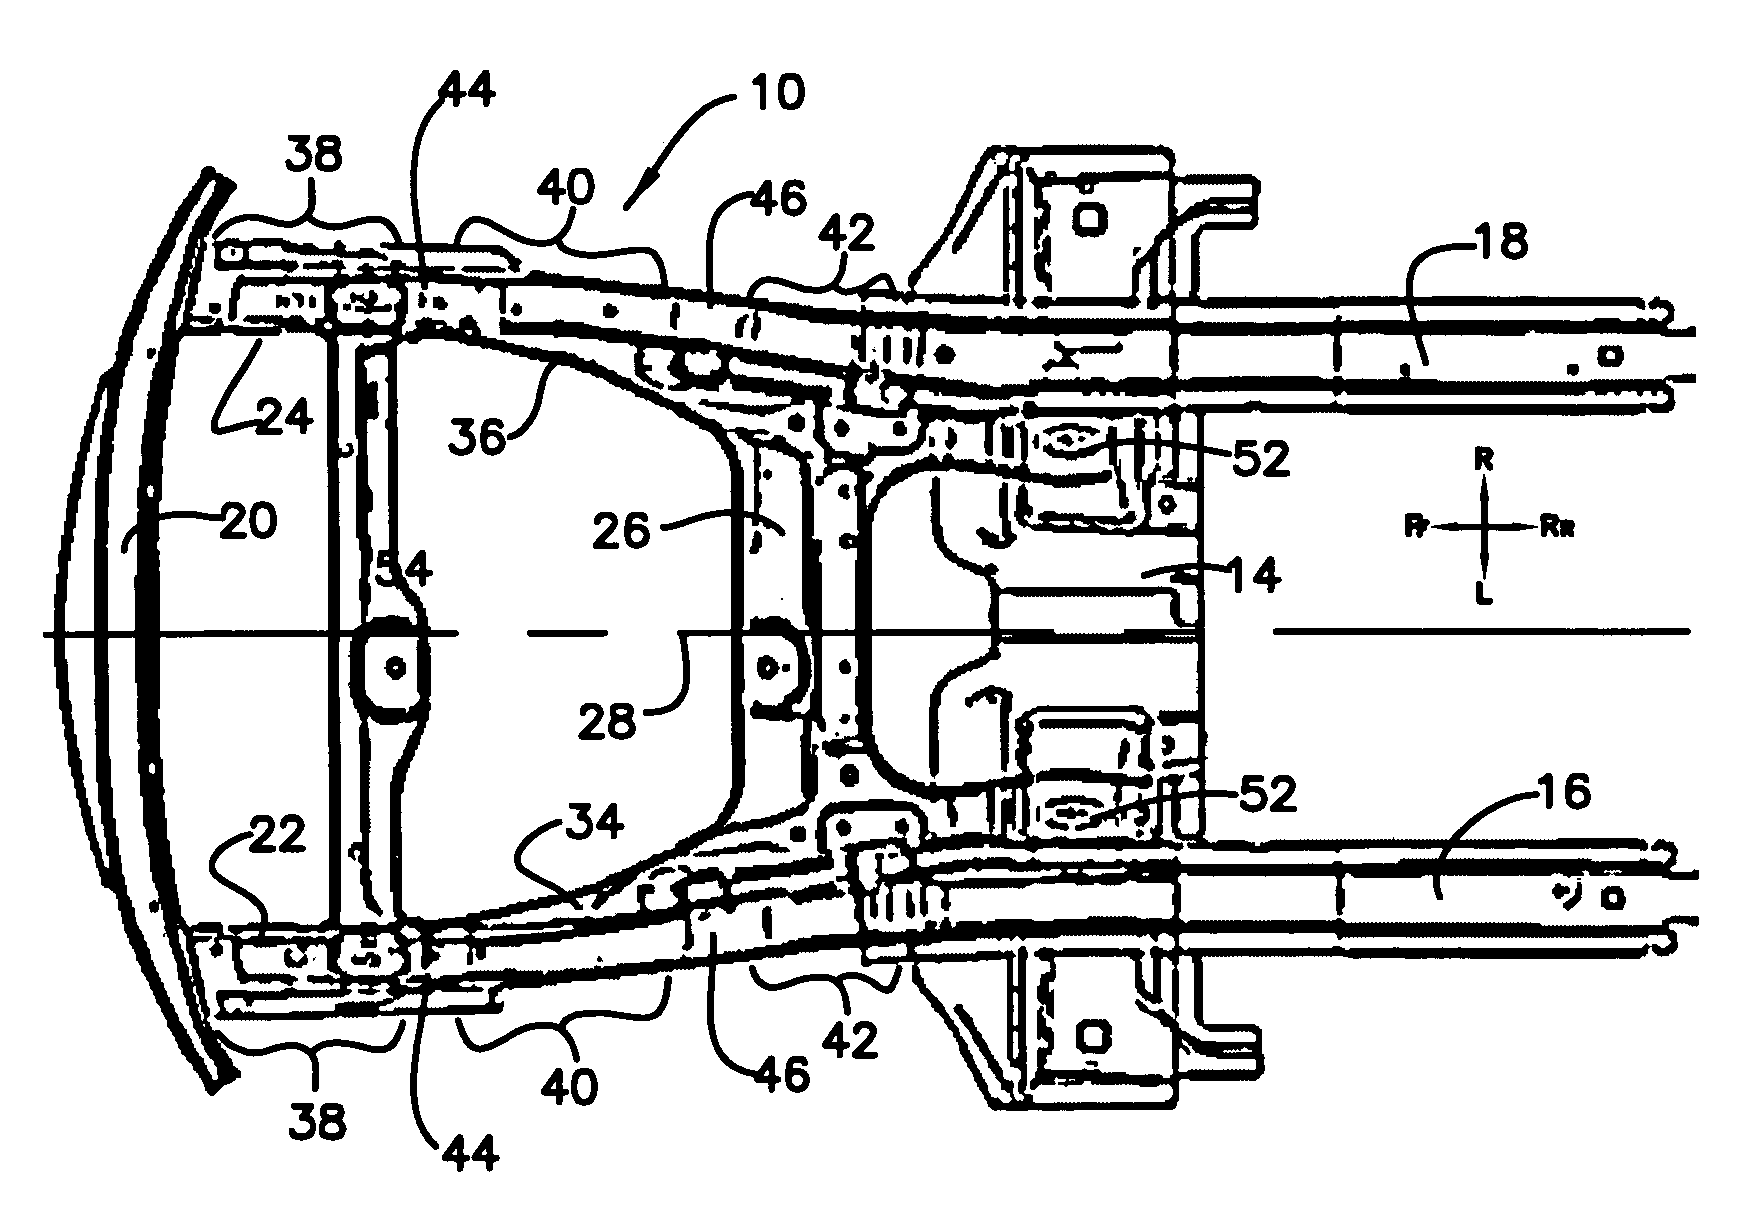 Energy absorbing front frame structure for a vehicle